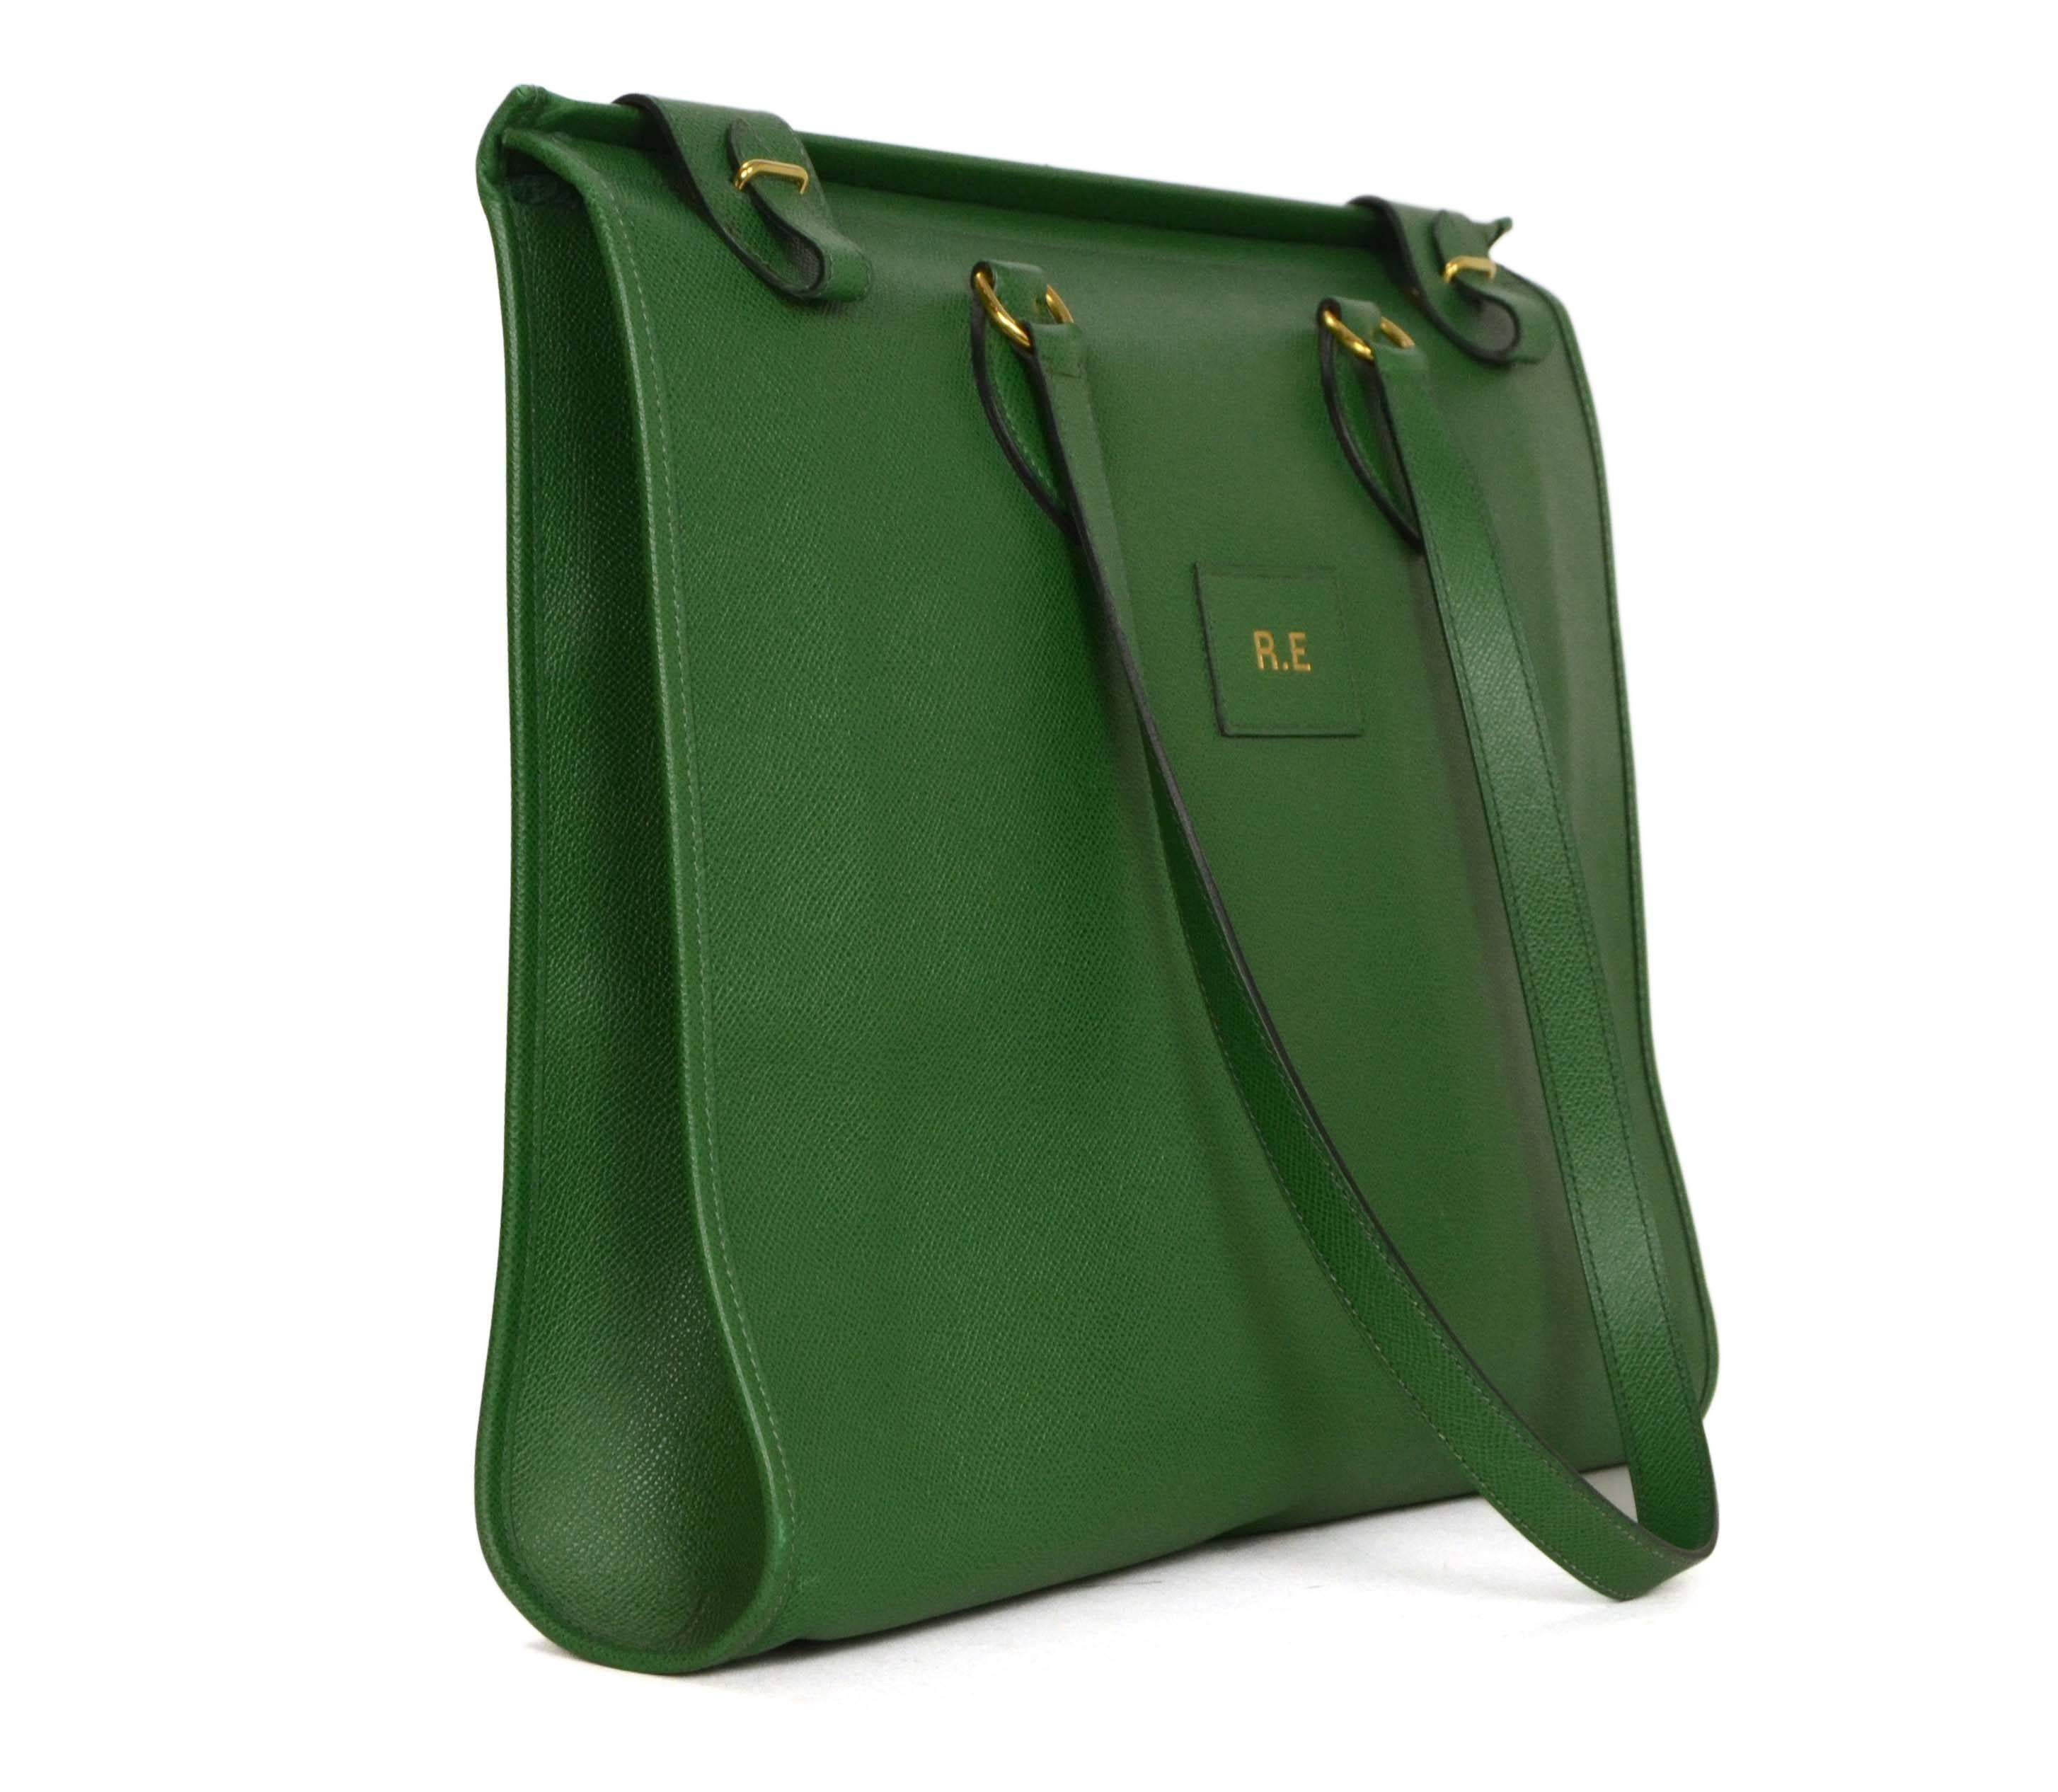 Hermes Vintage '93 Green Epsom Caba 40 Tote 
**NOTE: has initials R.E. stamped in gold on leather tab stitched on front of bag
Made In: Italy
Year of Production: 1993
Color: Green
Hardware: Goldtone
Materials: Epsom leather
Lining: Green